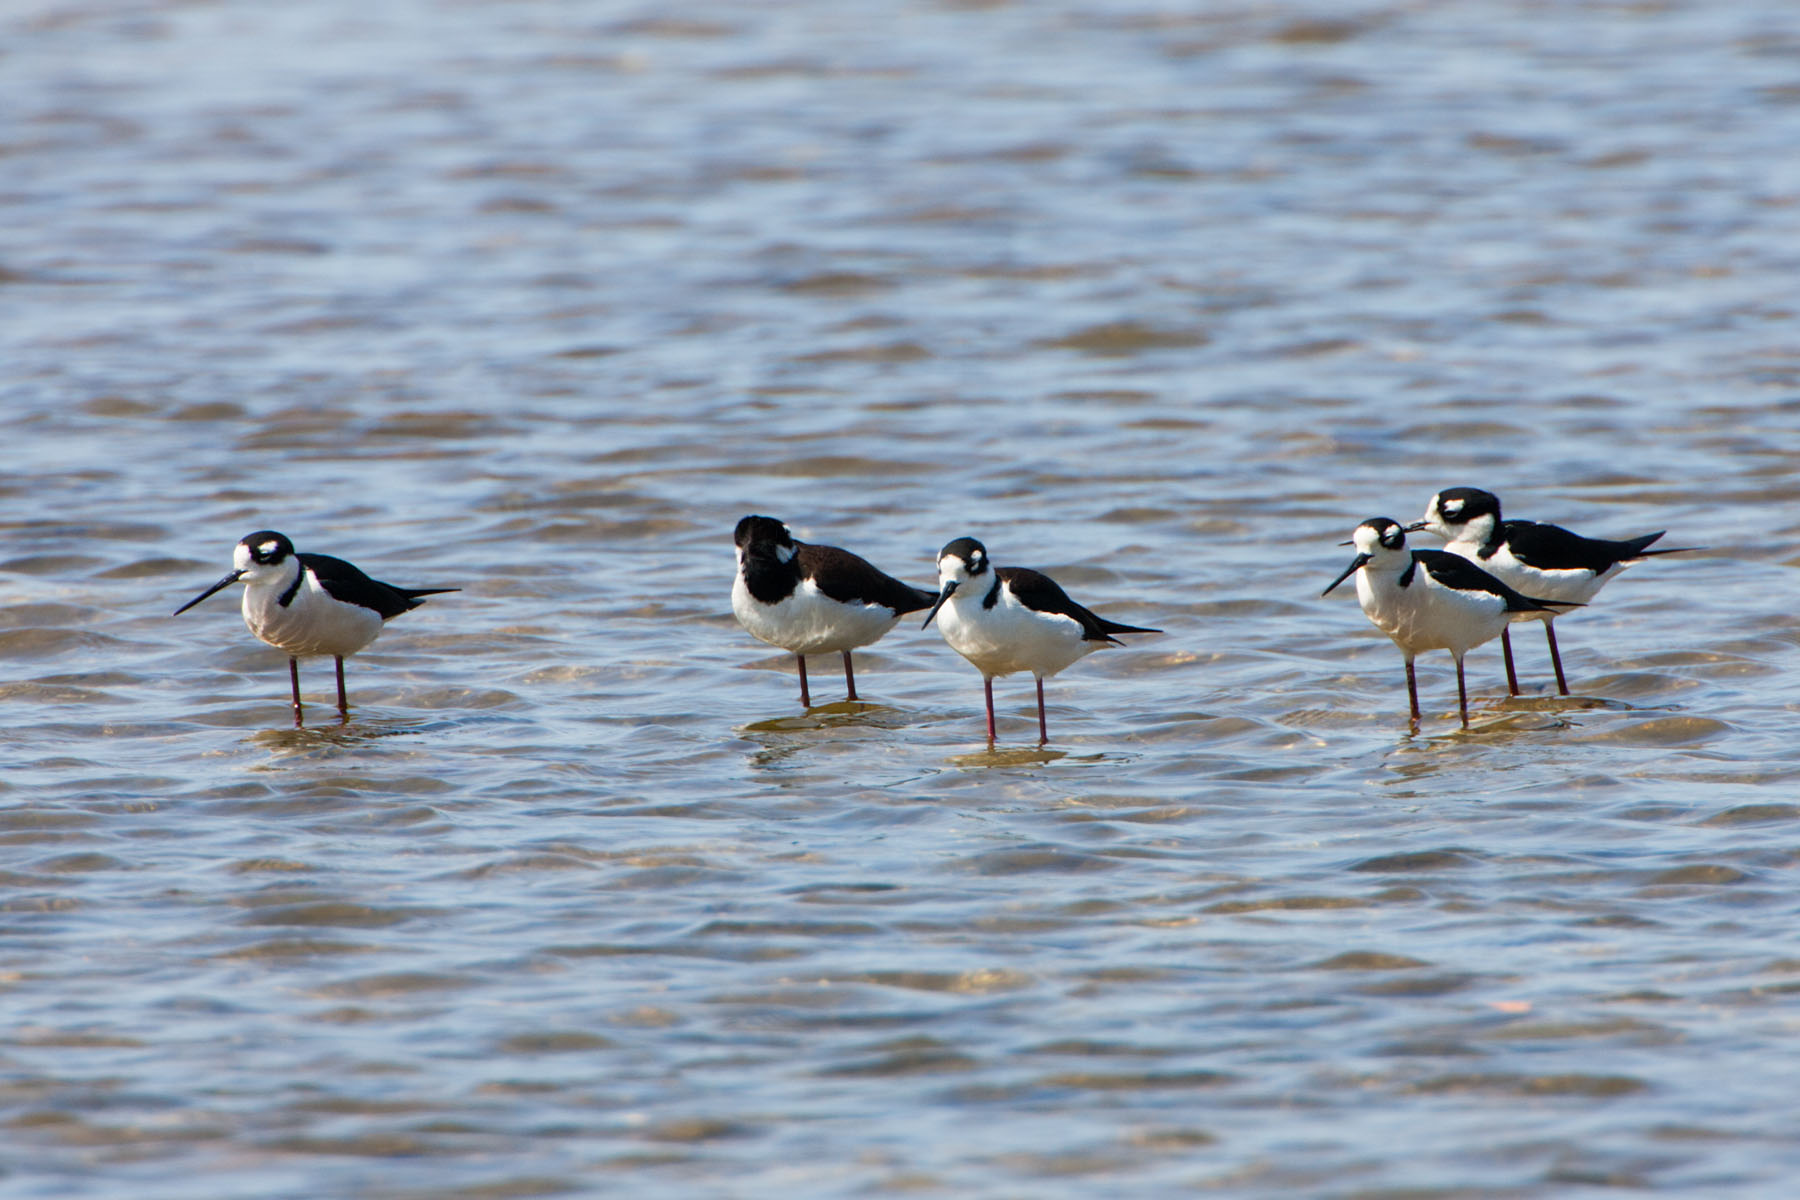 The birders at "Ding" Darling NWR freaked out when these Black-Necked Stilts showed up.  Apparently they are infrequent visitors to this area.  Sanibel Island, Florida.  Click for next photo.